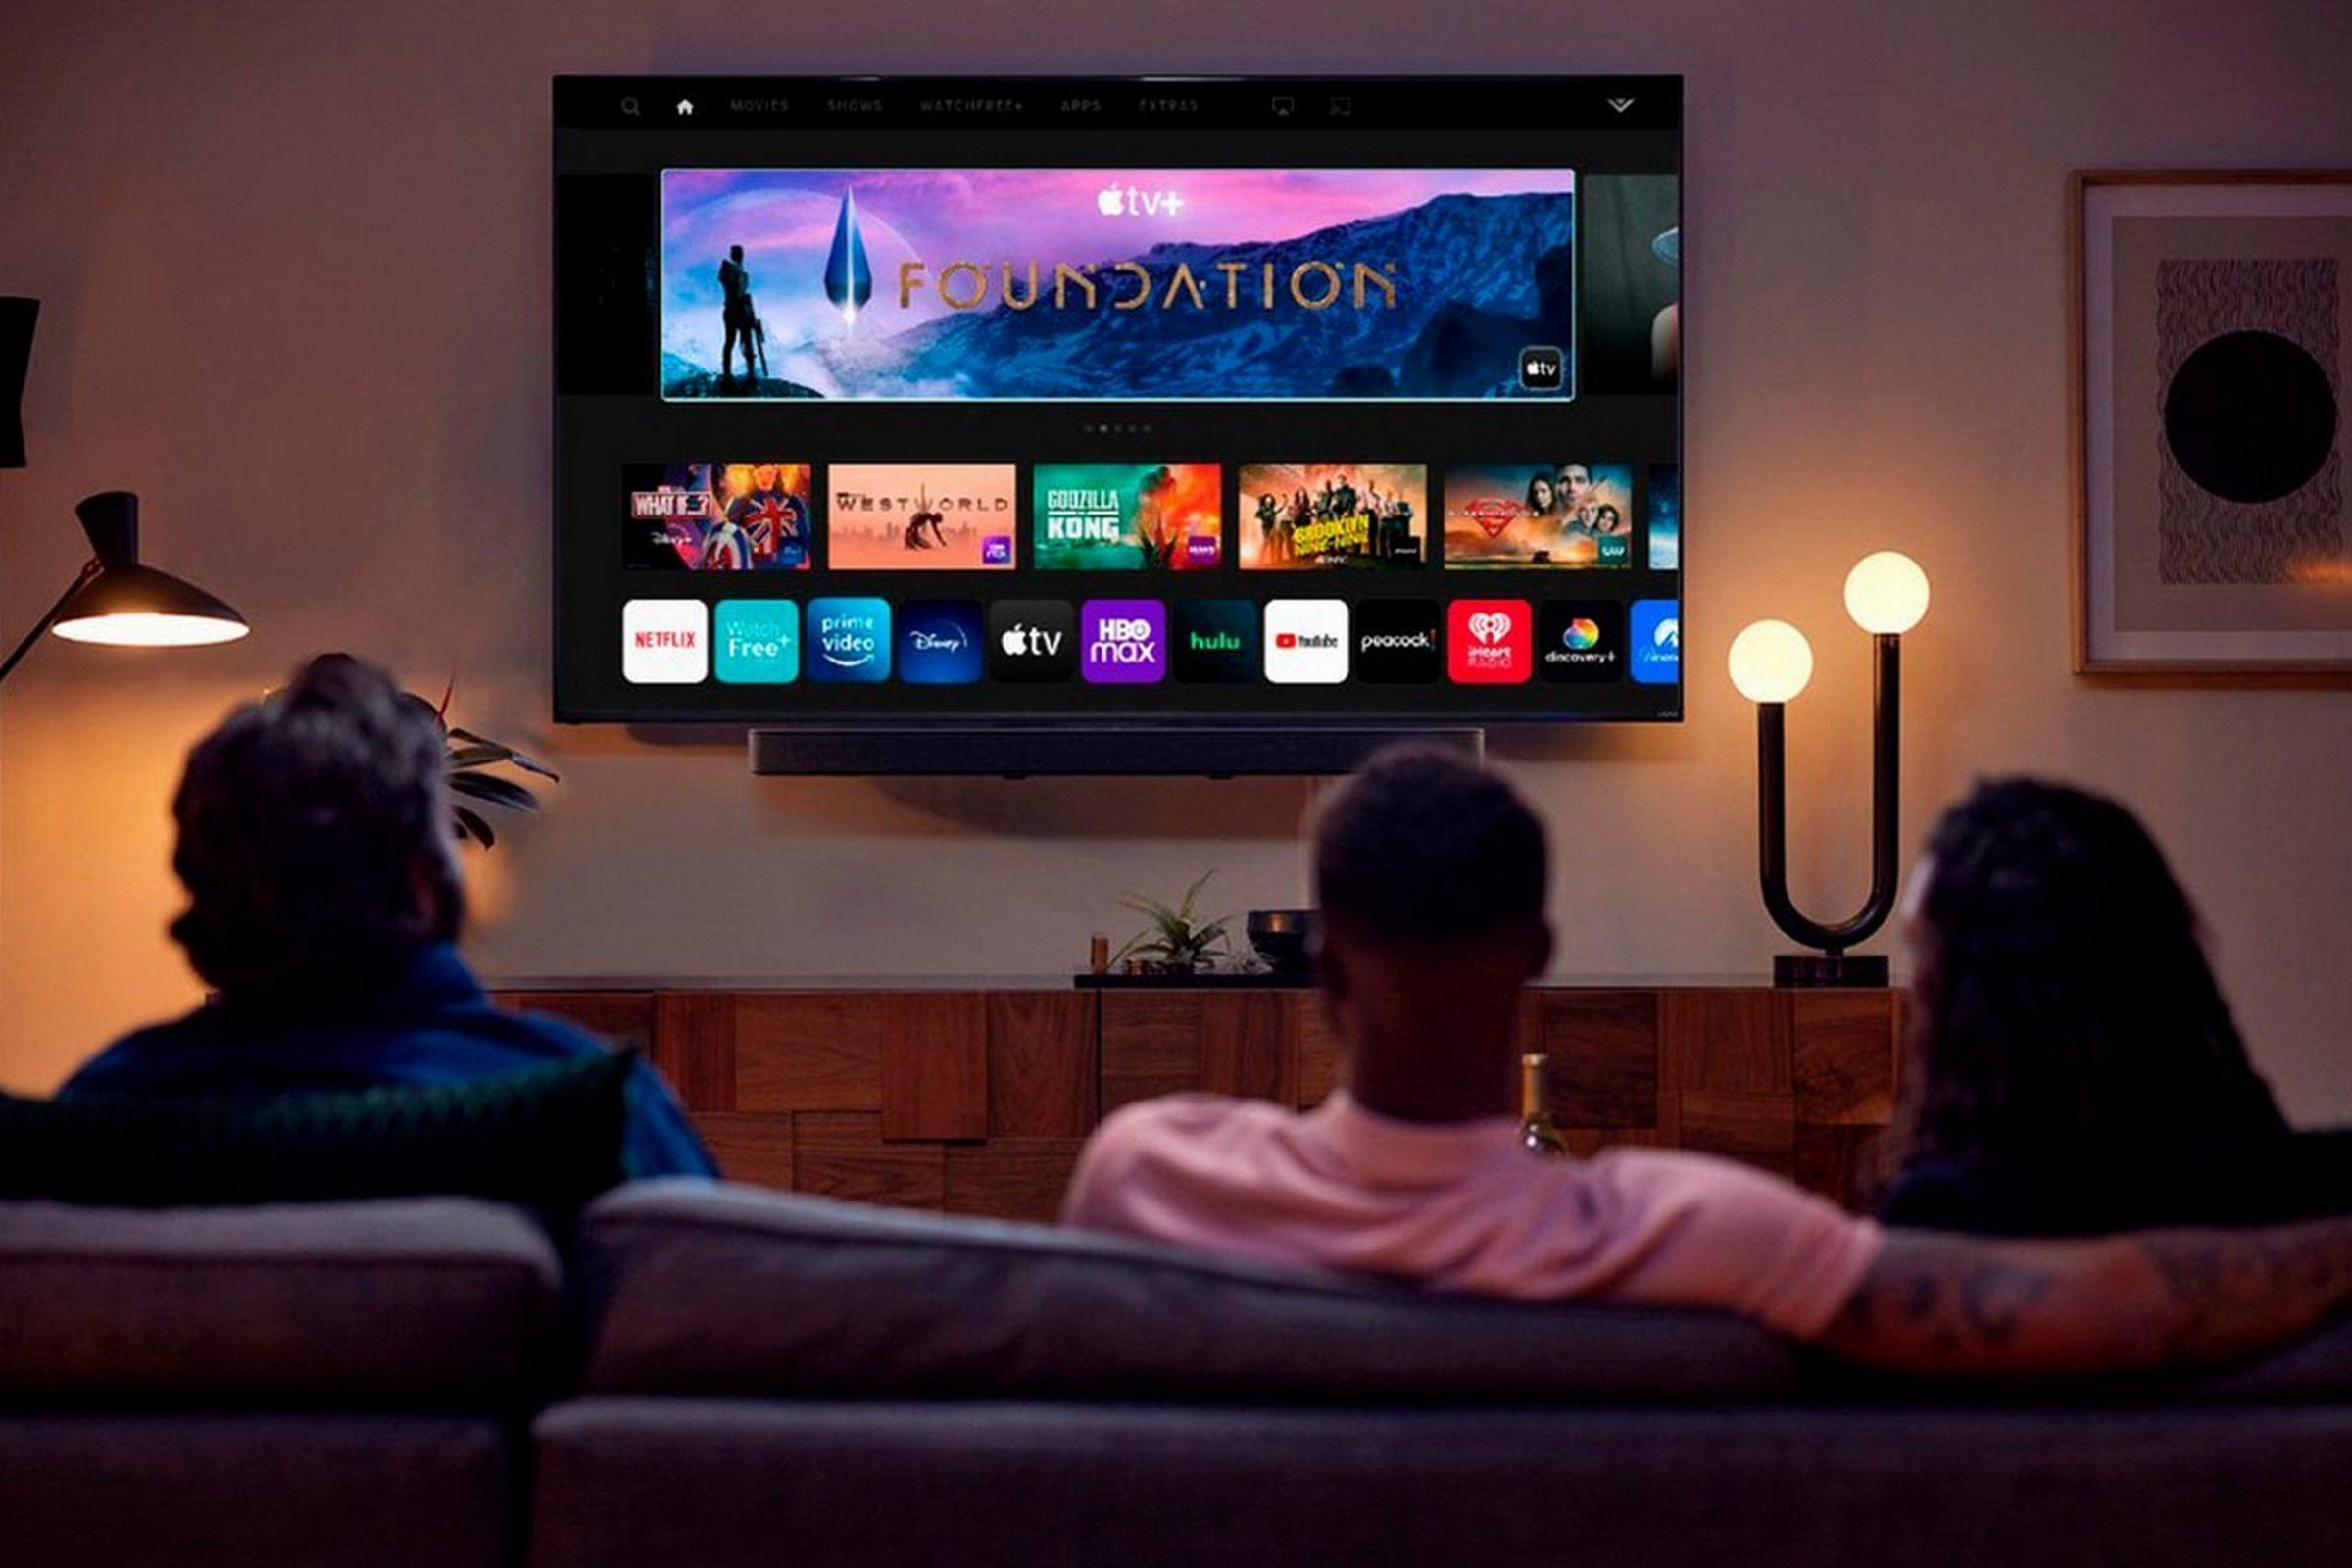 Three people on a couch, pictired from the back, watching a TV mounted on the wall